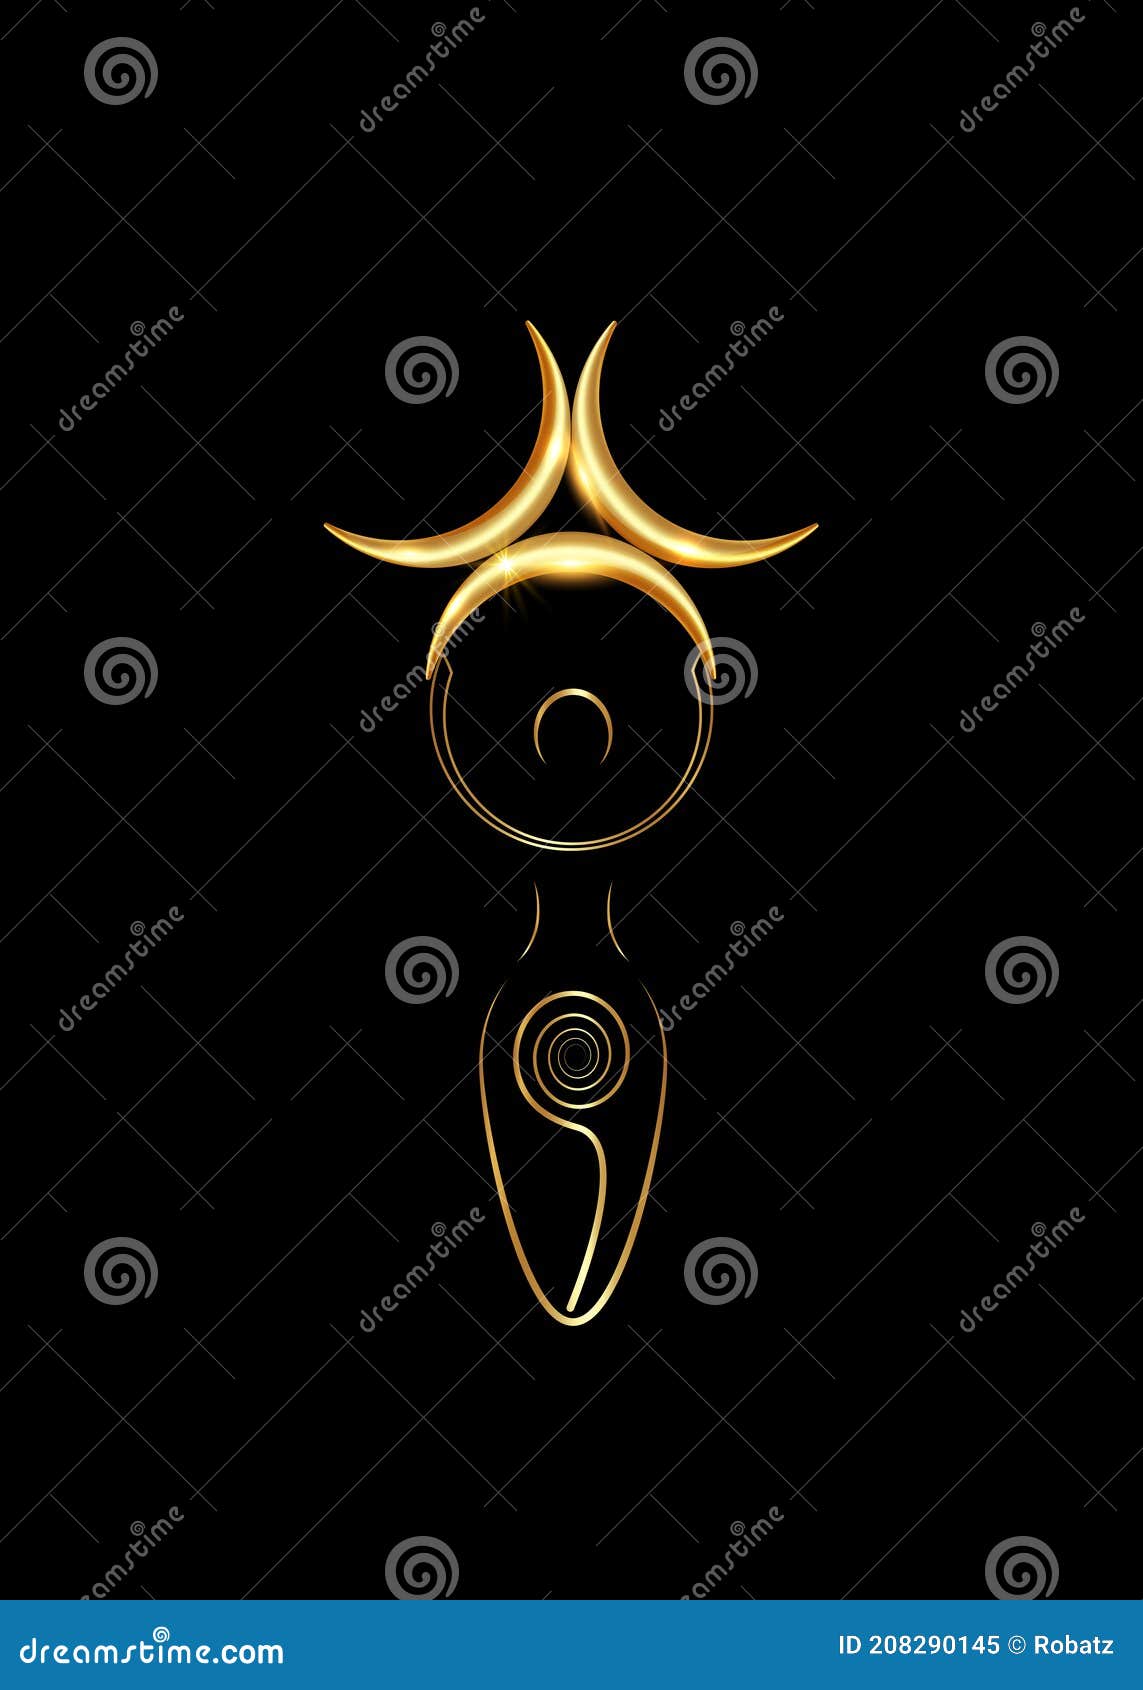 gold spiral goddess of fertility and triple moon wiccan. the spiral cycle of life, death and rebirth. golden woman wicca mother